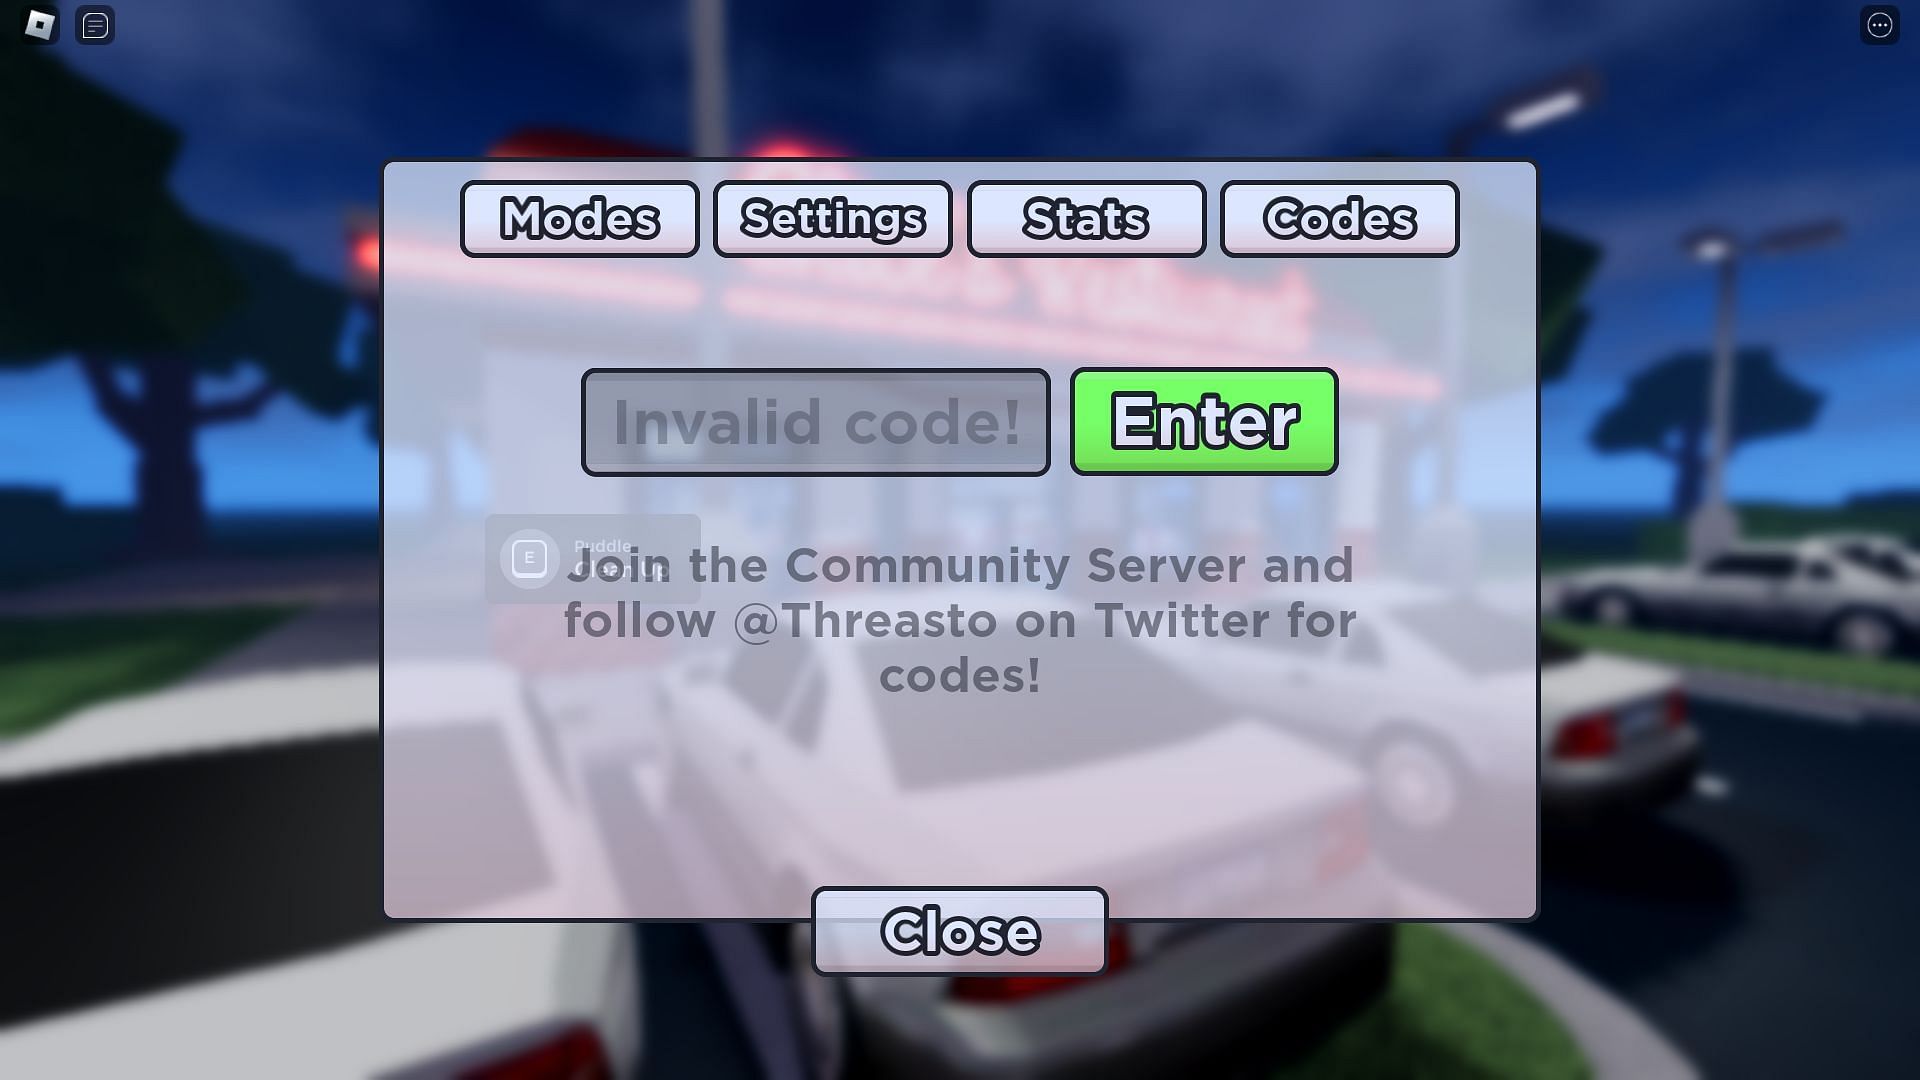 Troubleshooting codes for Dysfunctional Diner (Image via Roblox)